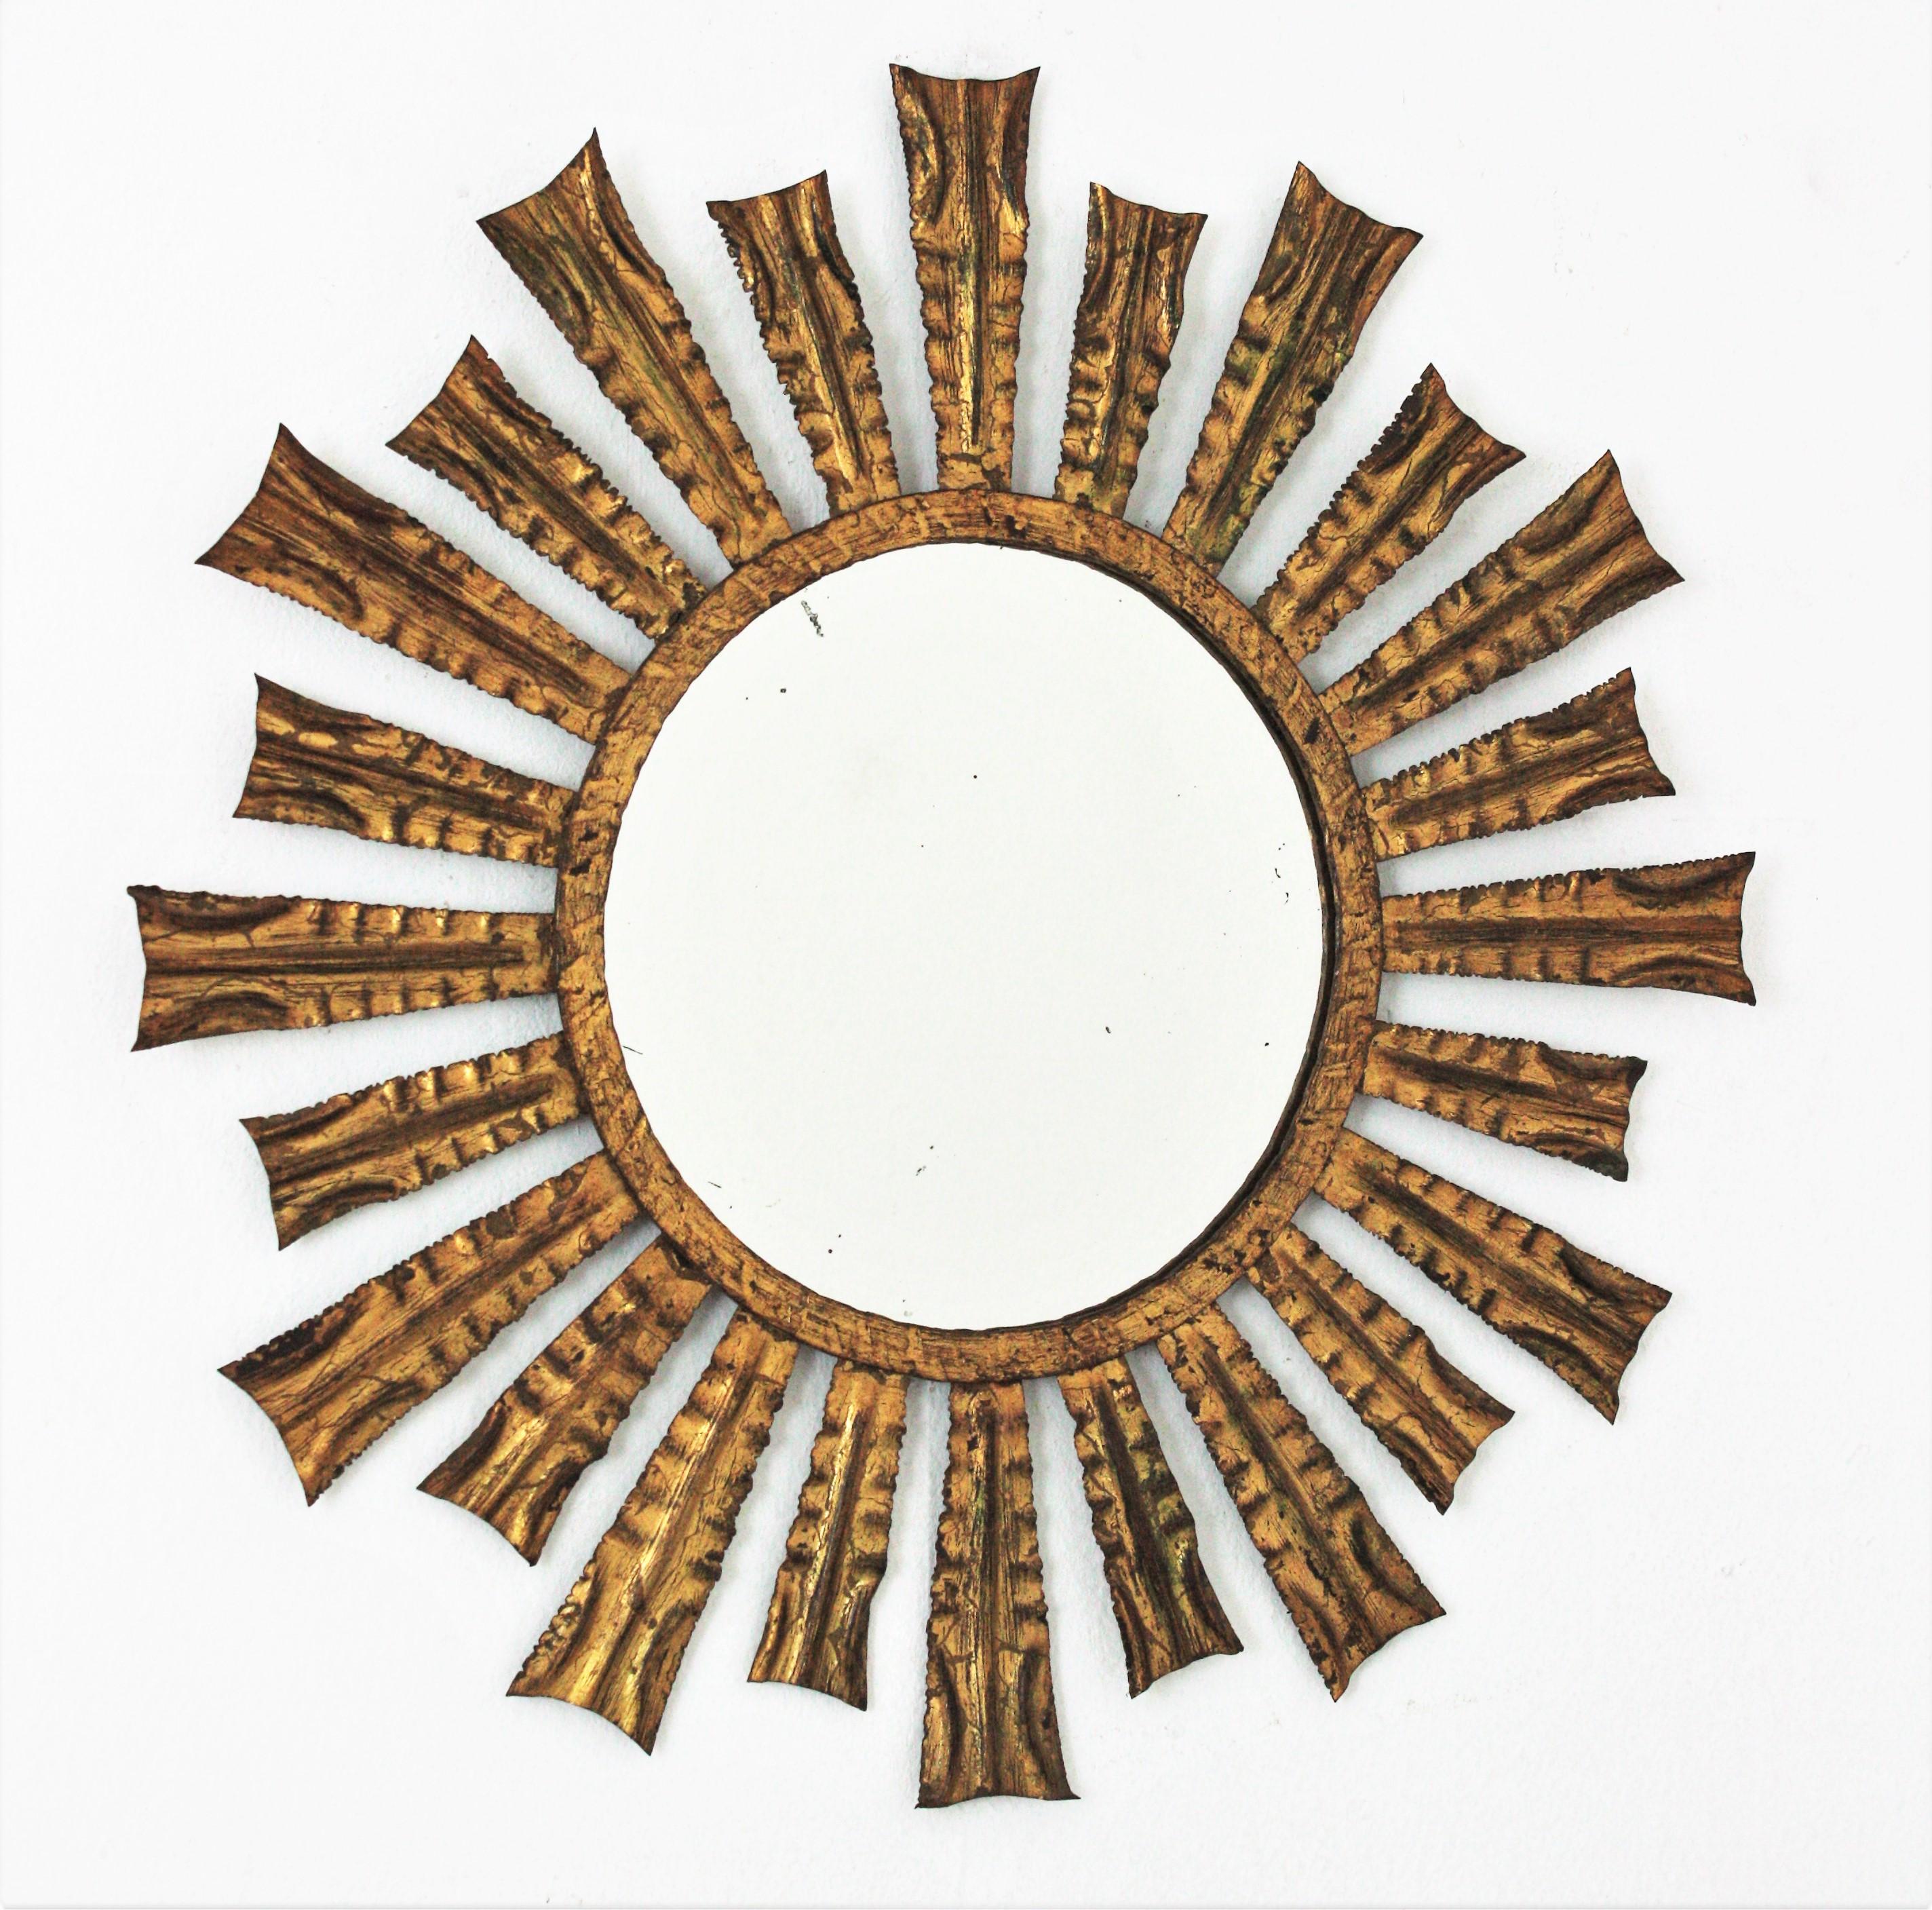 One of a kind Hand-Hammered Sunburst Mirror, Iron, Gold Leaf, France, 1950s.
Eye-catching gilt metal sunburst mirror with alternating rays in two sizes. Richly adorned by the hammer work. Nice aged patina showing its original gold leaf